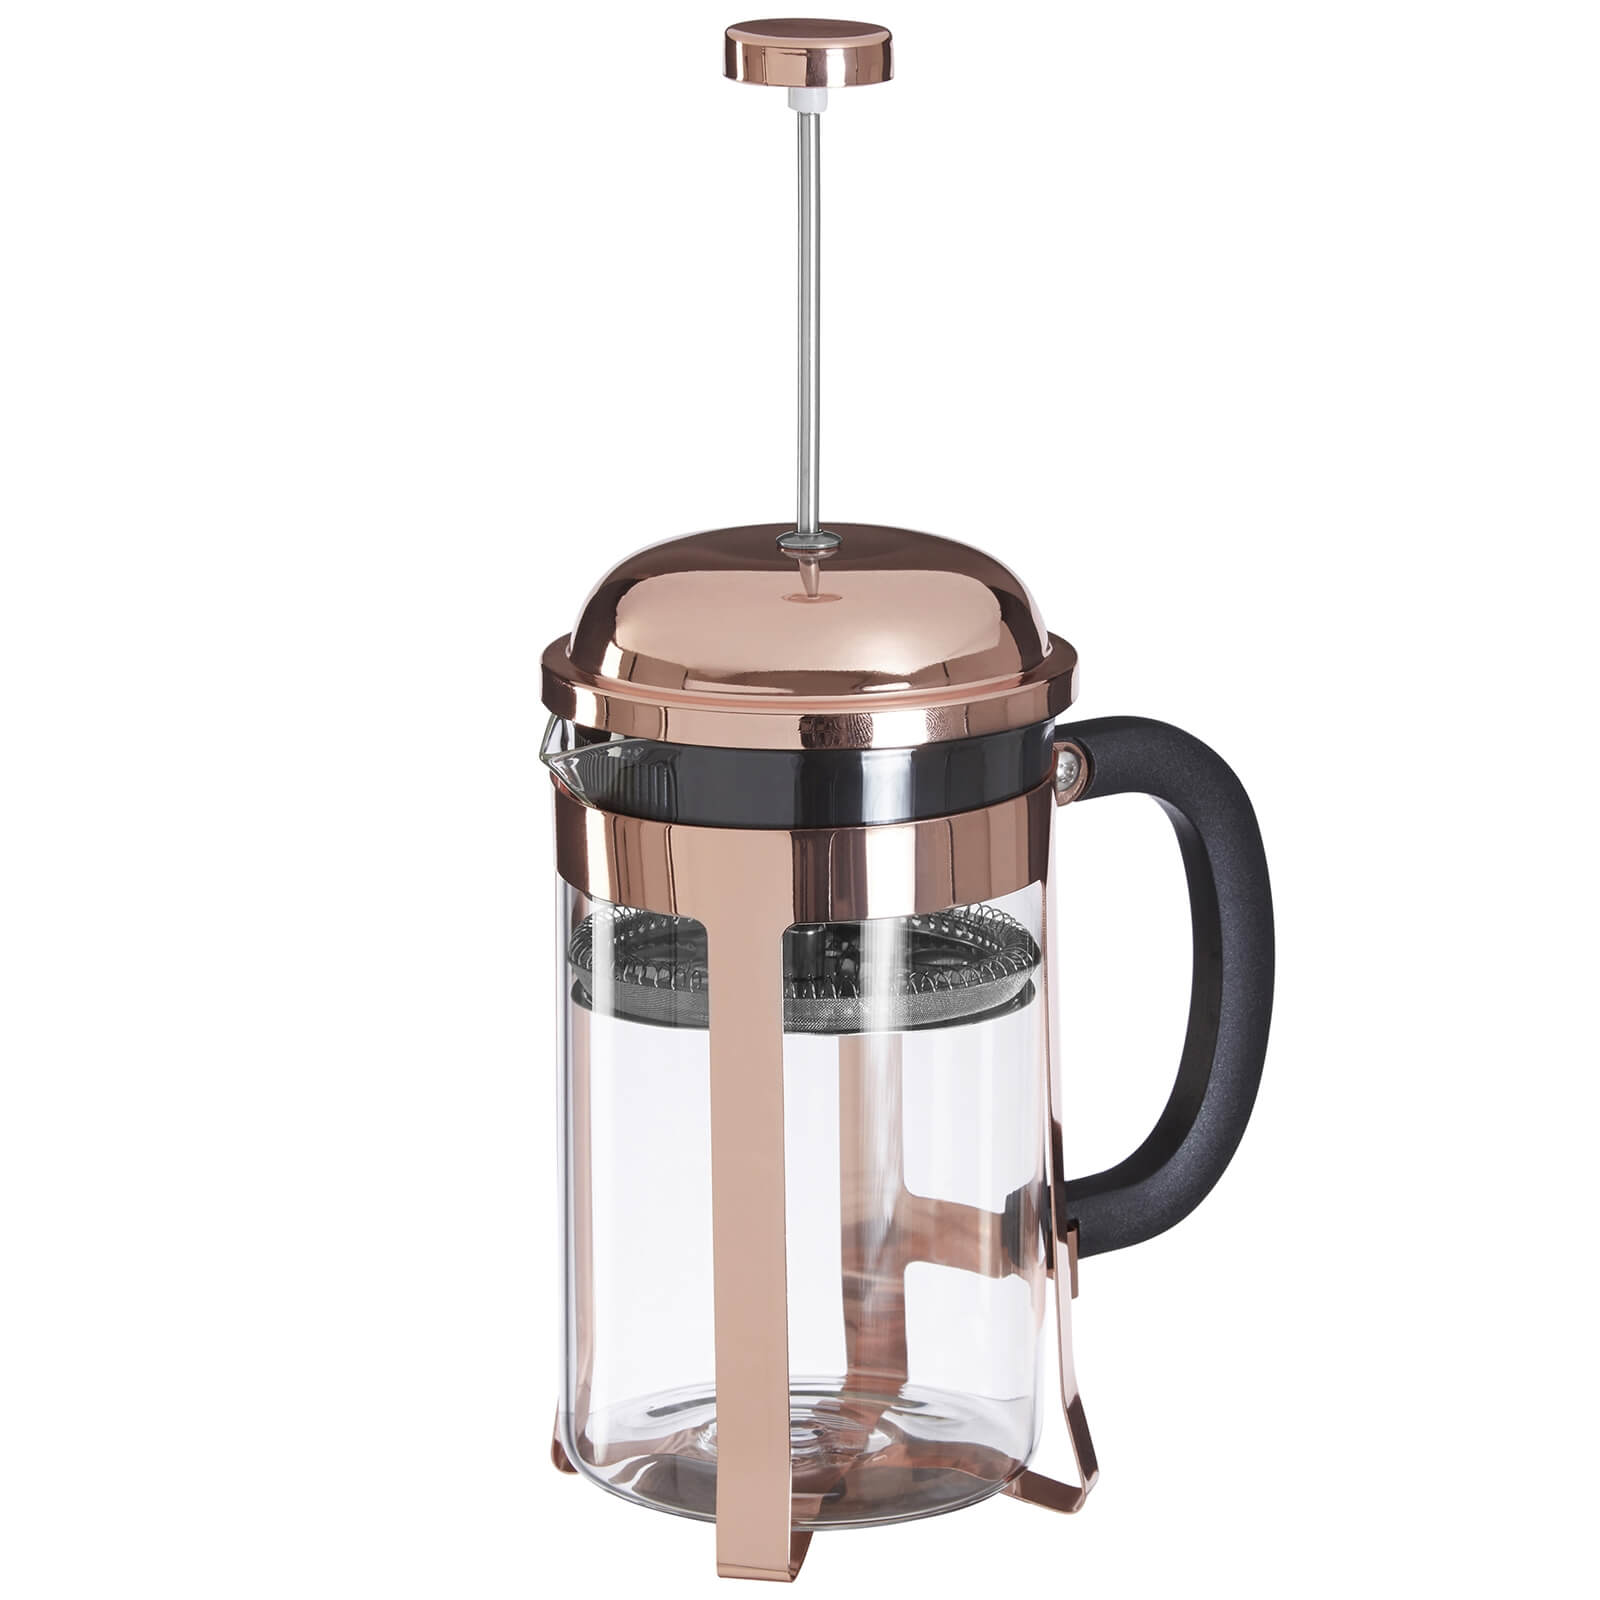 Allera Cafetiere - 800ml - Rose Gold Finish